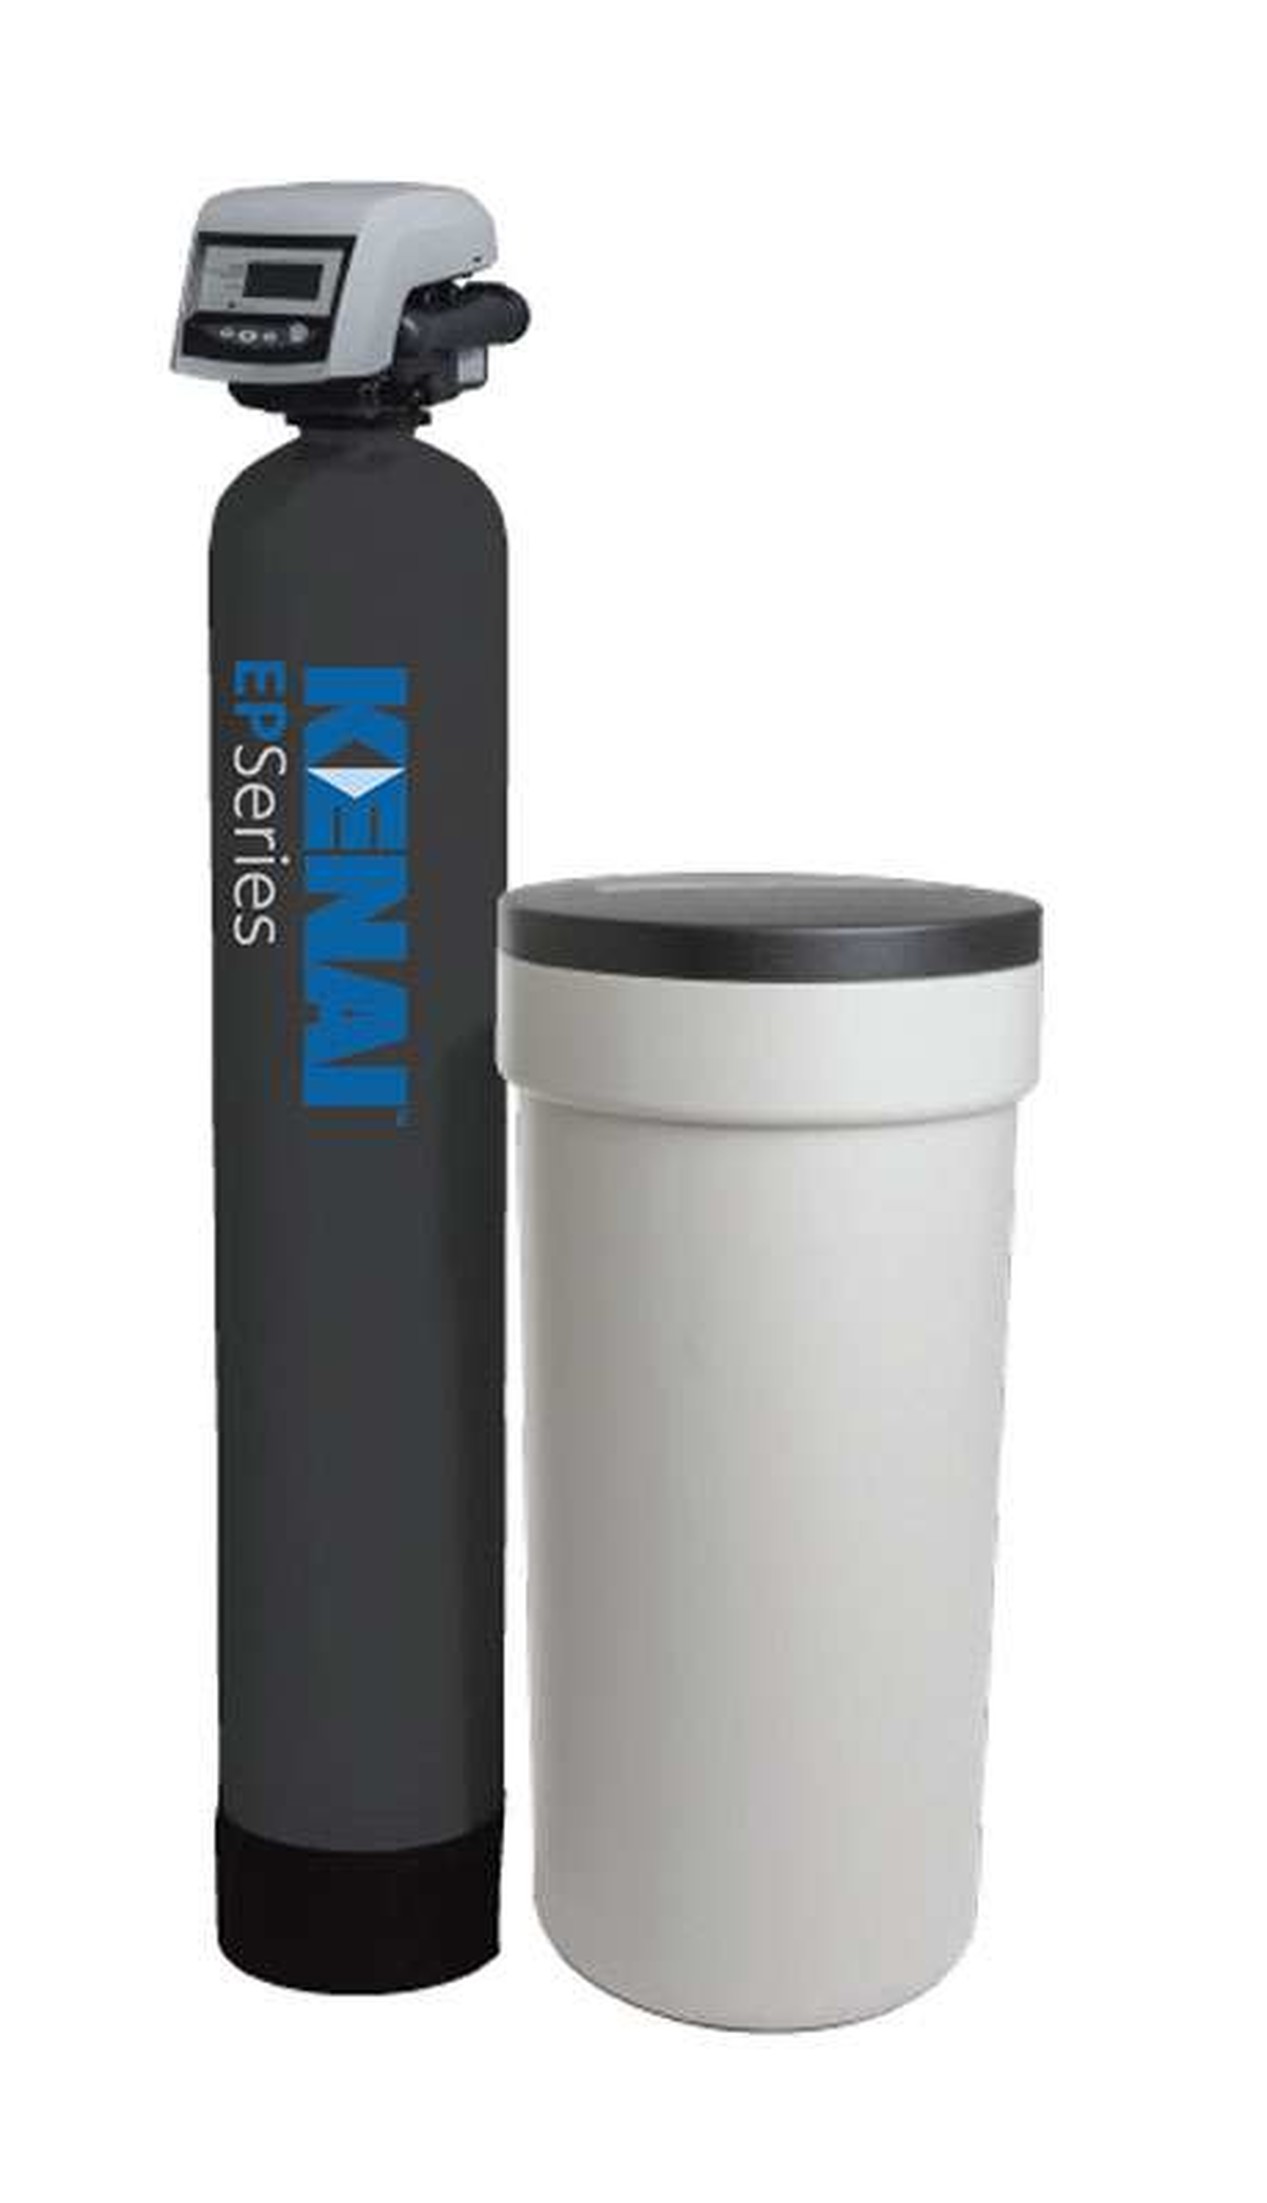 Water Filtration Systems